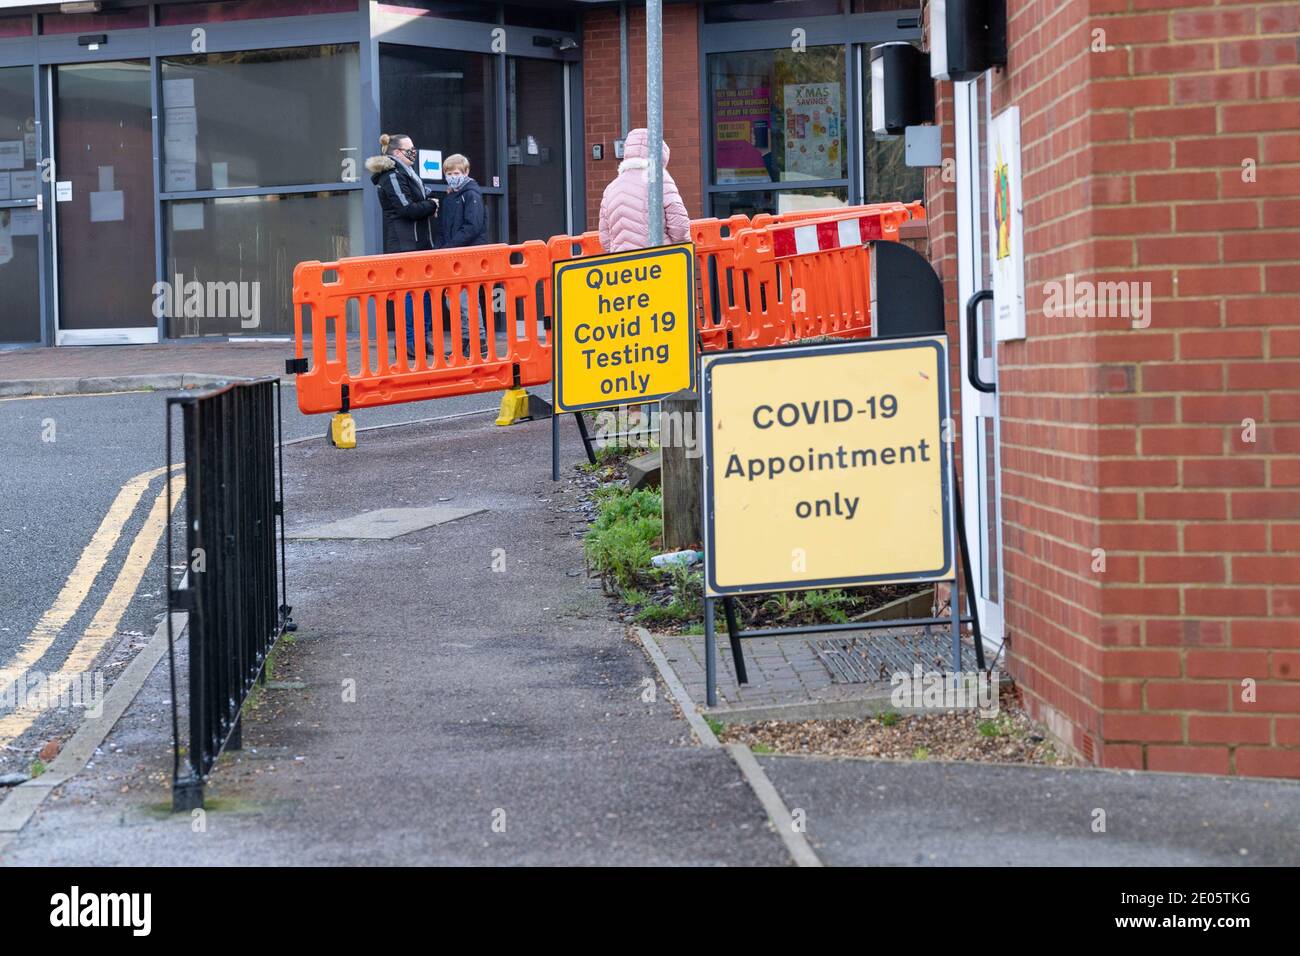 Brentwood Essex 30th December 2020 Brentwood, Essex has the highest covid-19 infection rate in England and Essex has declared a 'Critical incident' due to pressure on hospitals and NHS facilities. The fast Lateral Flow Test centre in Brentwood was virtually deserted Credit: Ian Davidson/Alamy Live News Stock Photo